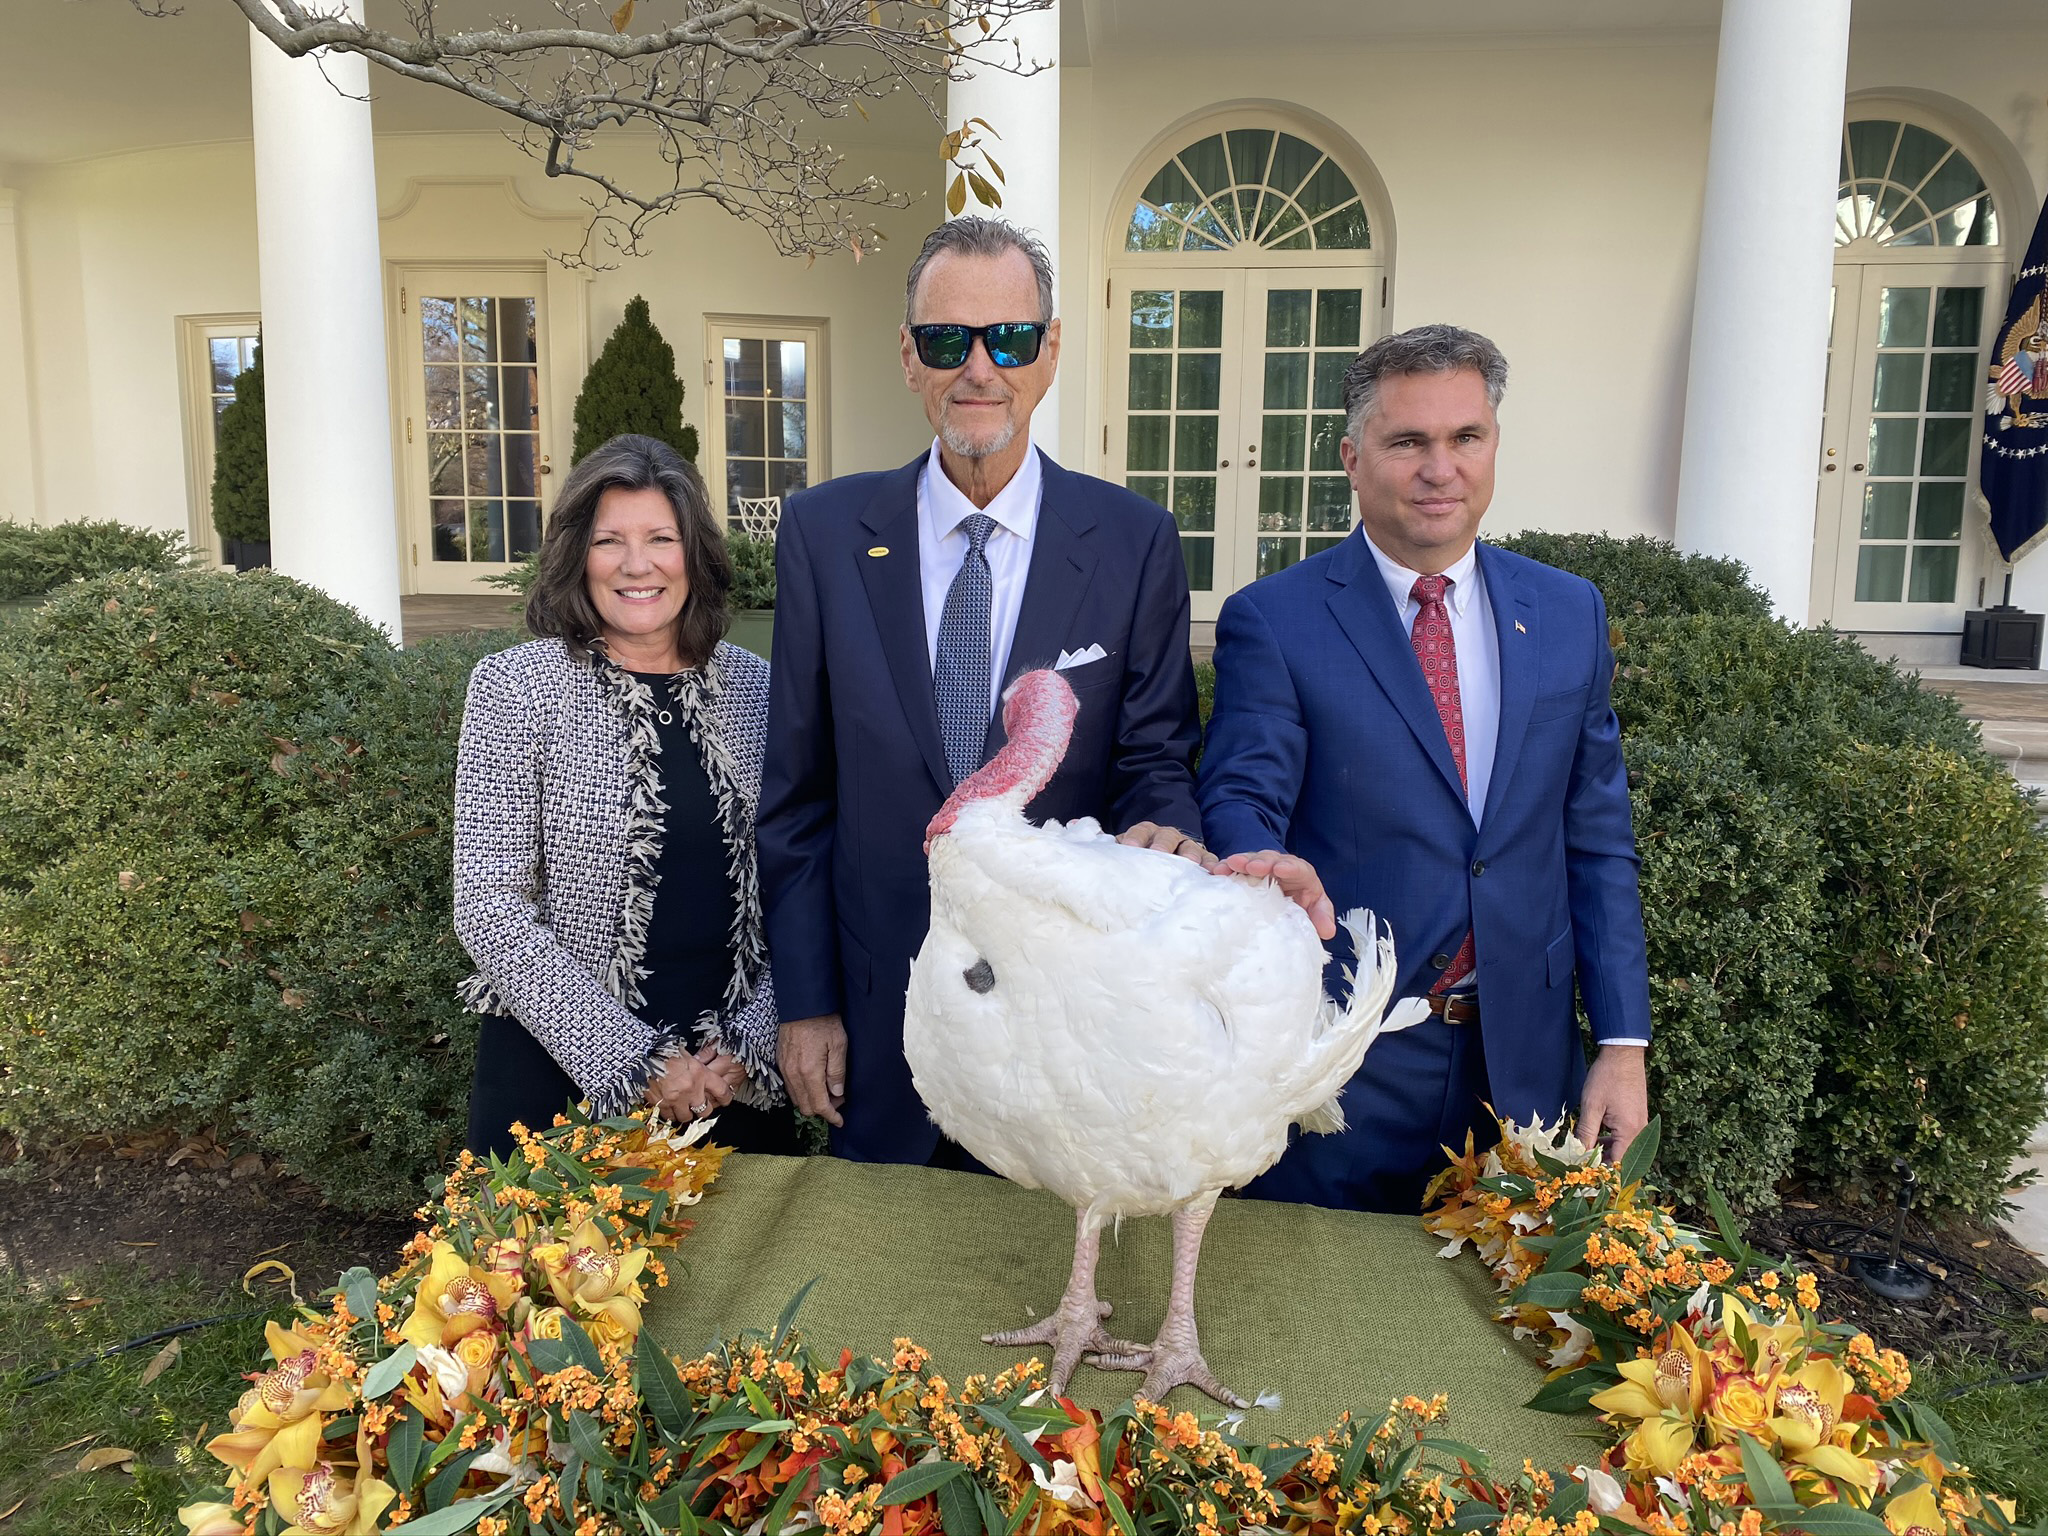 National Turkey Federation Chairman Kerry Doughty, his wife Jan and grower Wellie Jackson present Butter as the 2019 Presidential Turkey.